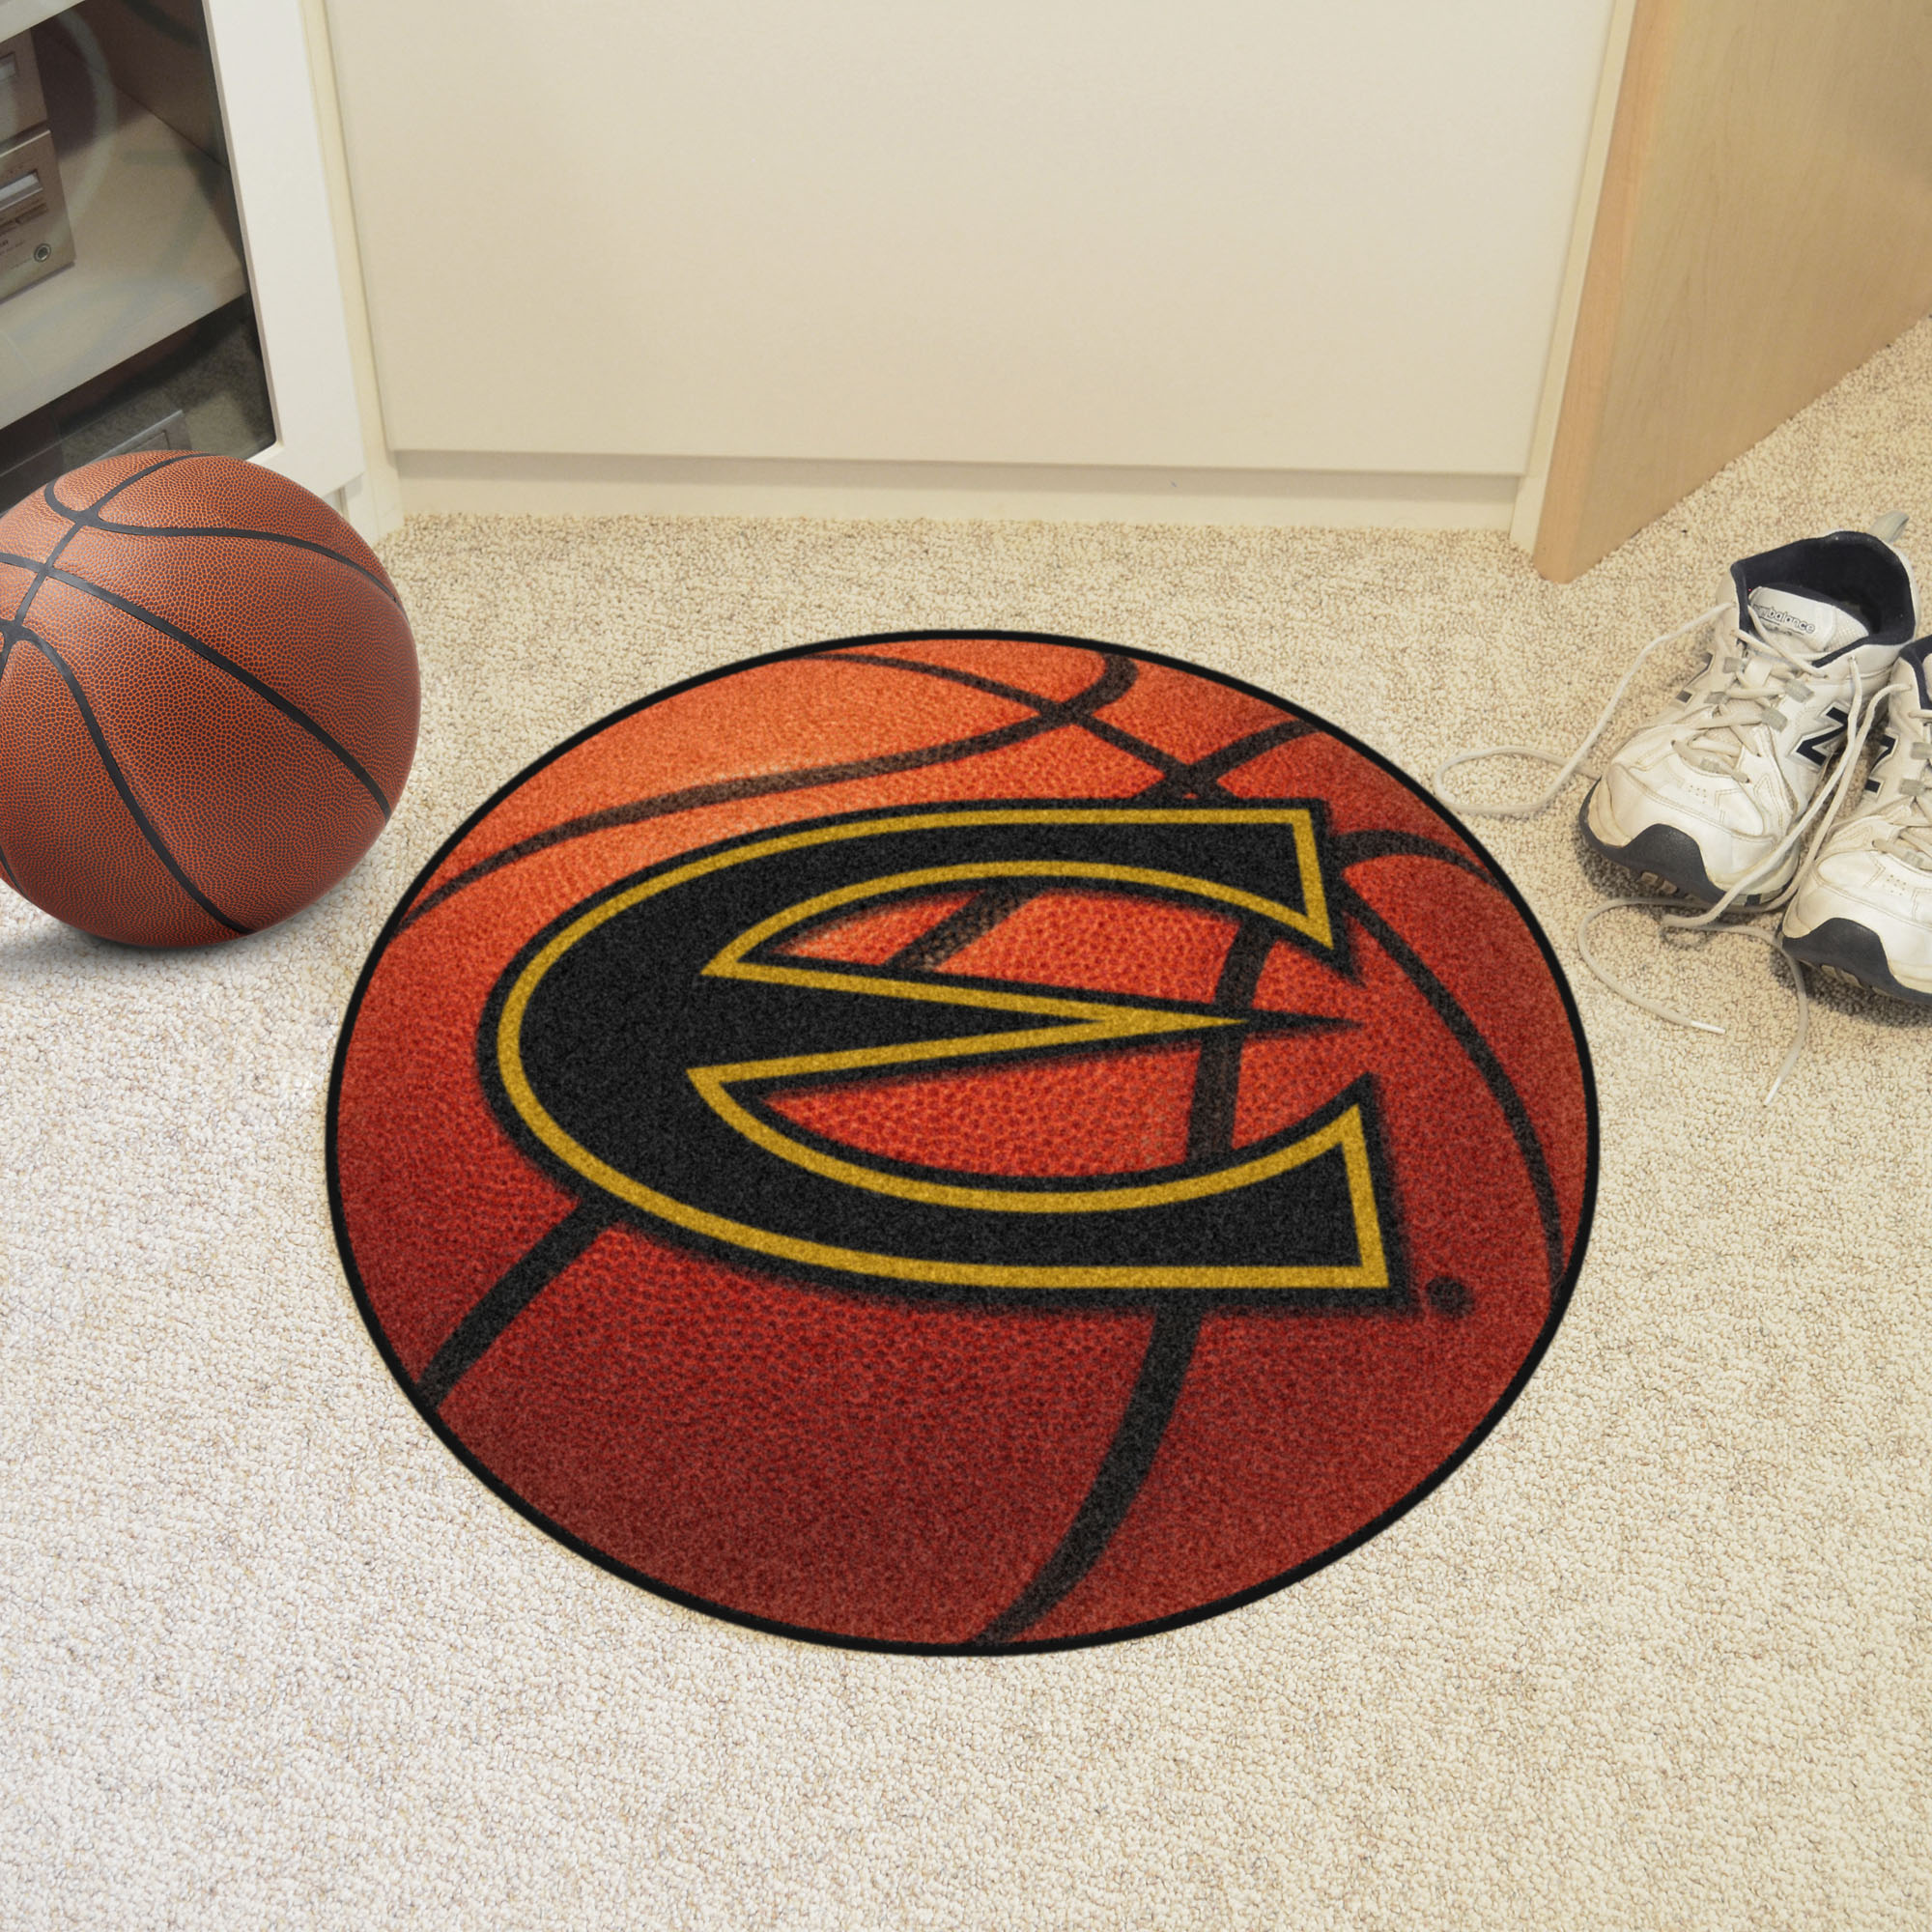 Emporia State University Ball Shaped Area Rugs (Ball Shaped Area Rugs: Basketball)